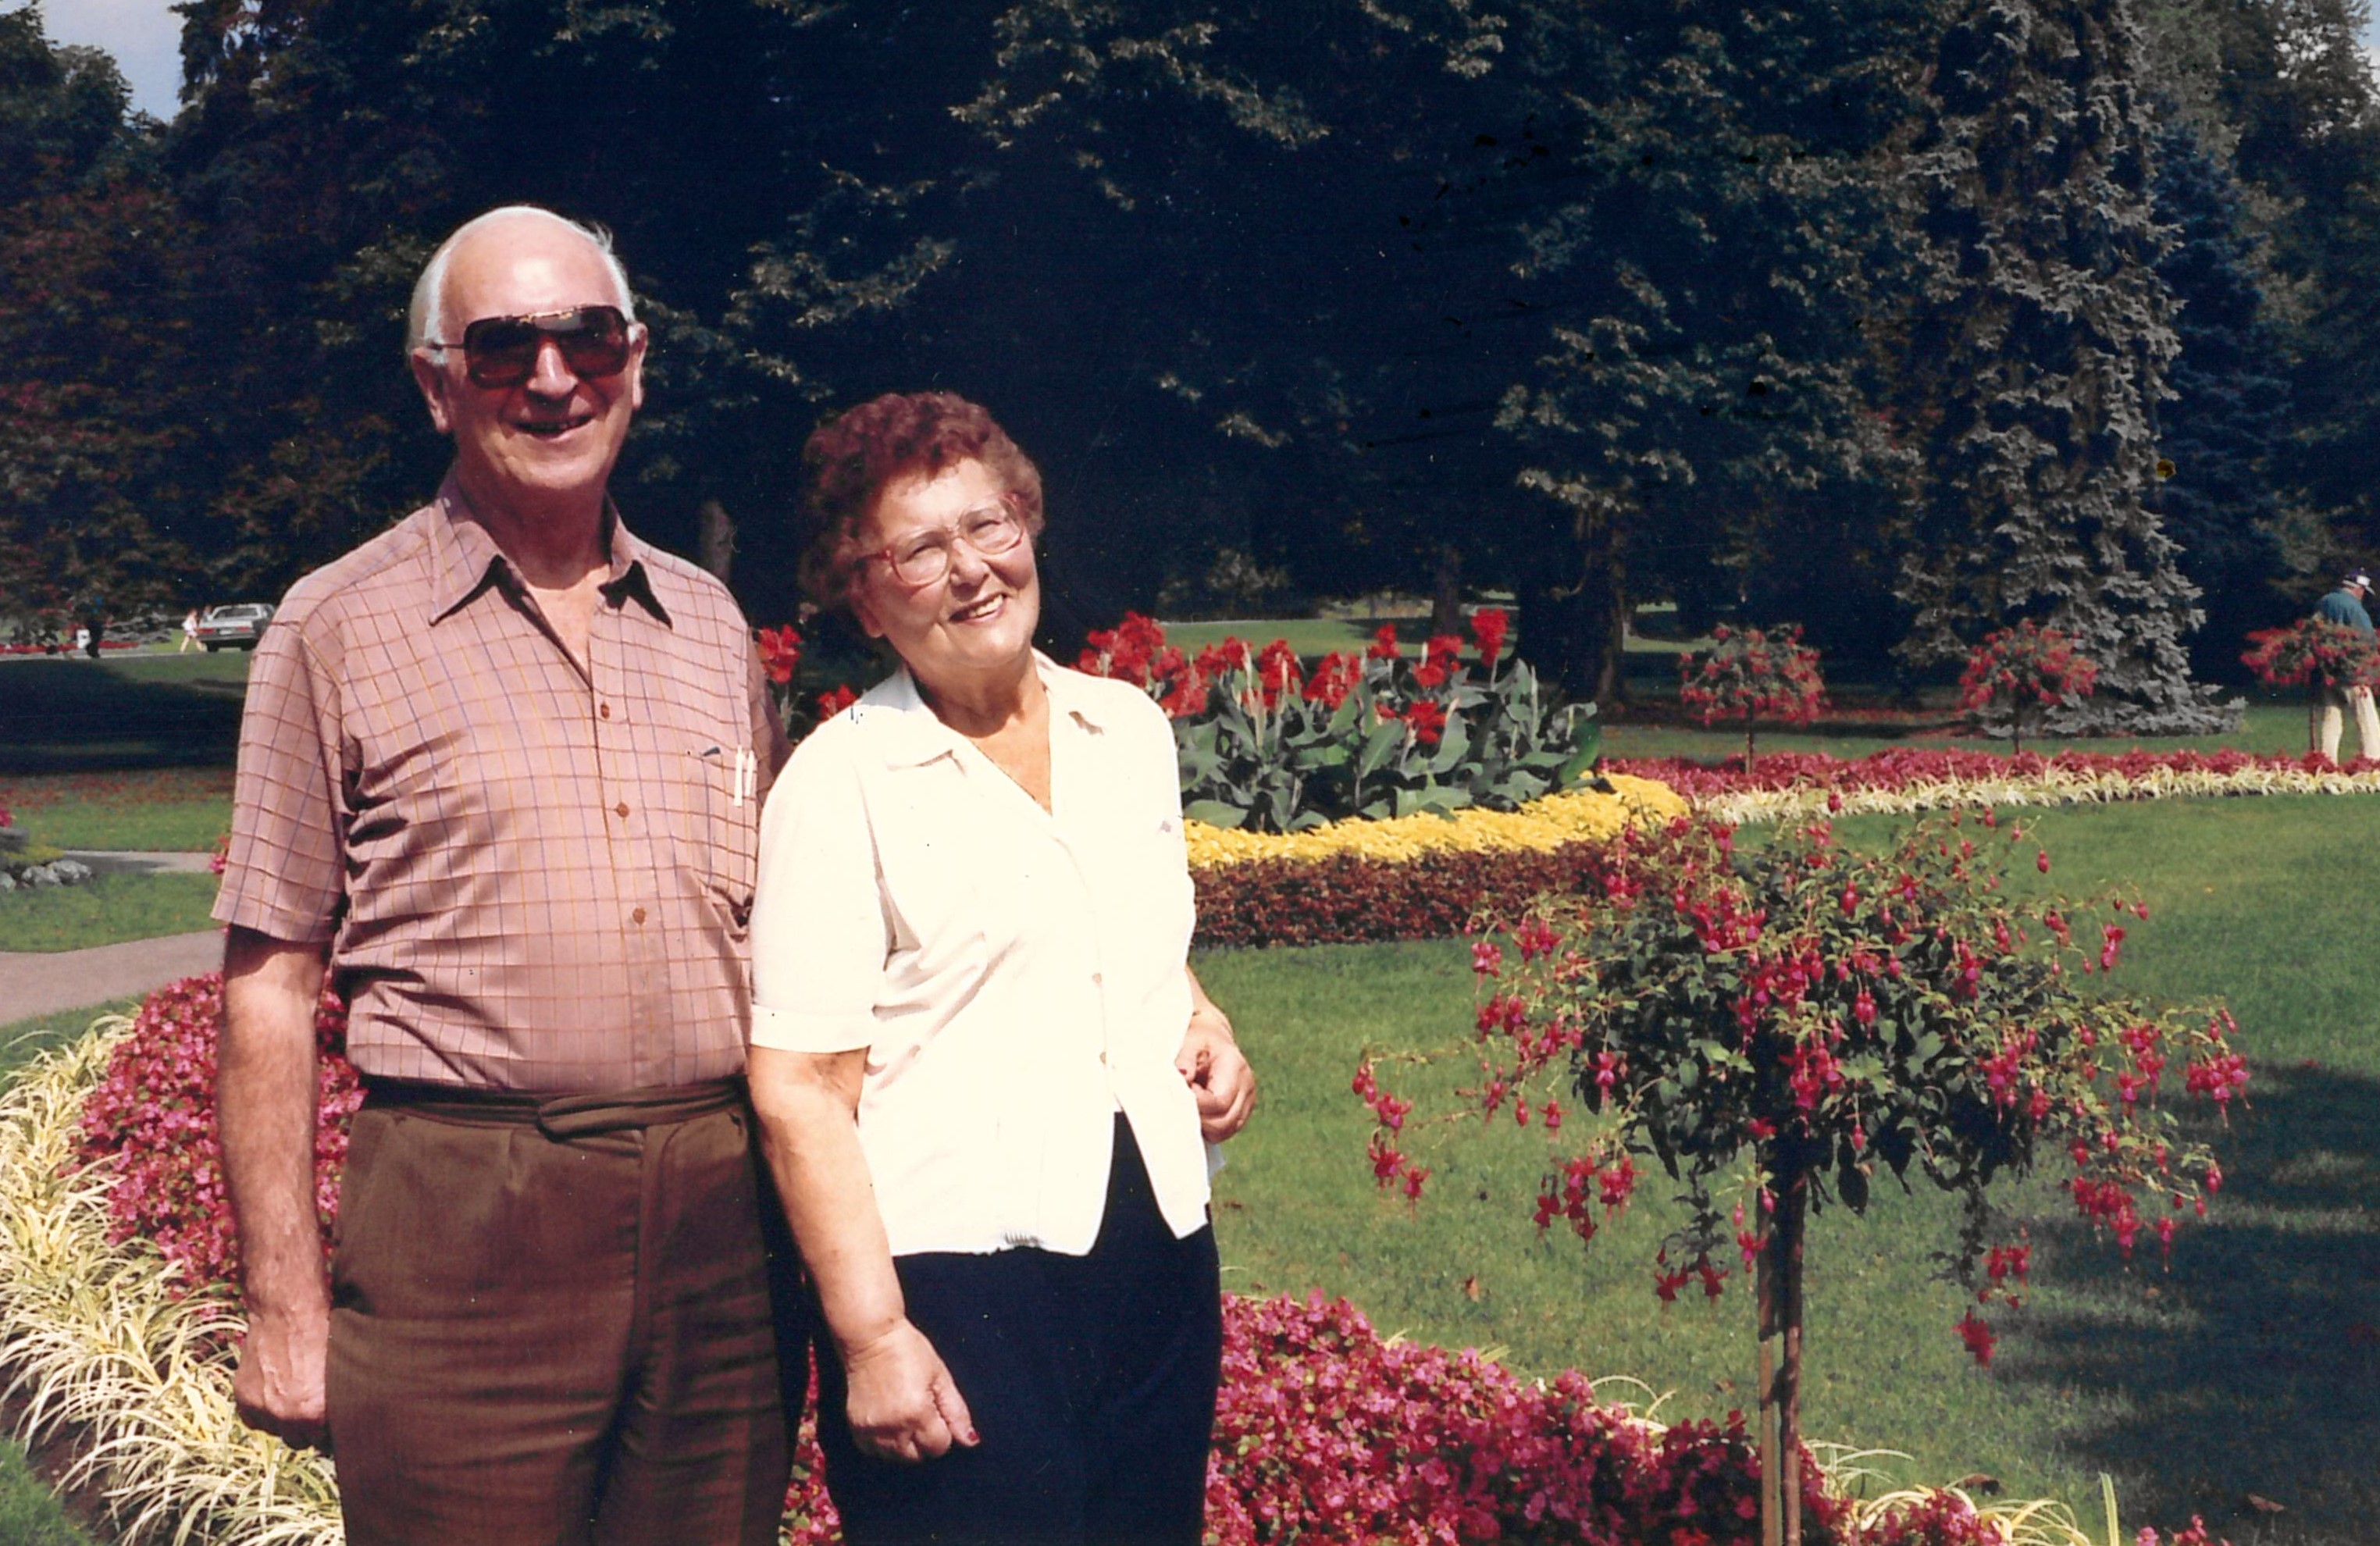 Michael Sherbourne and his wife Muriel in USA, 1989 [MS434 A4249 7/2]